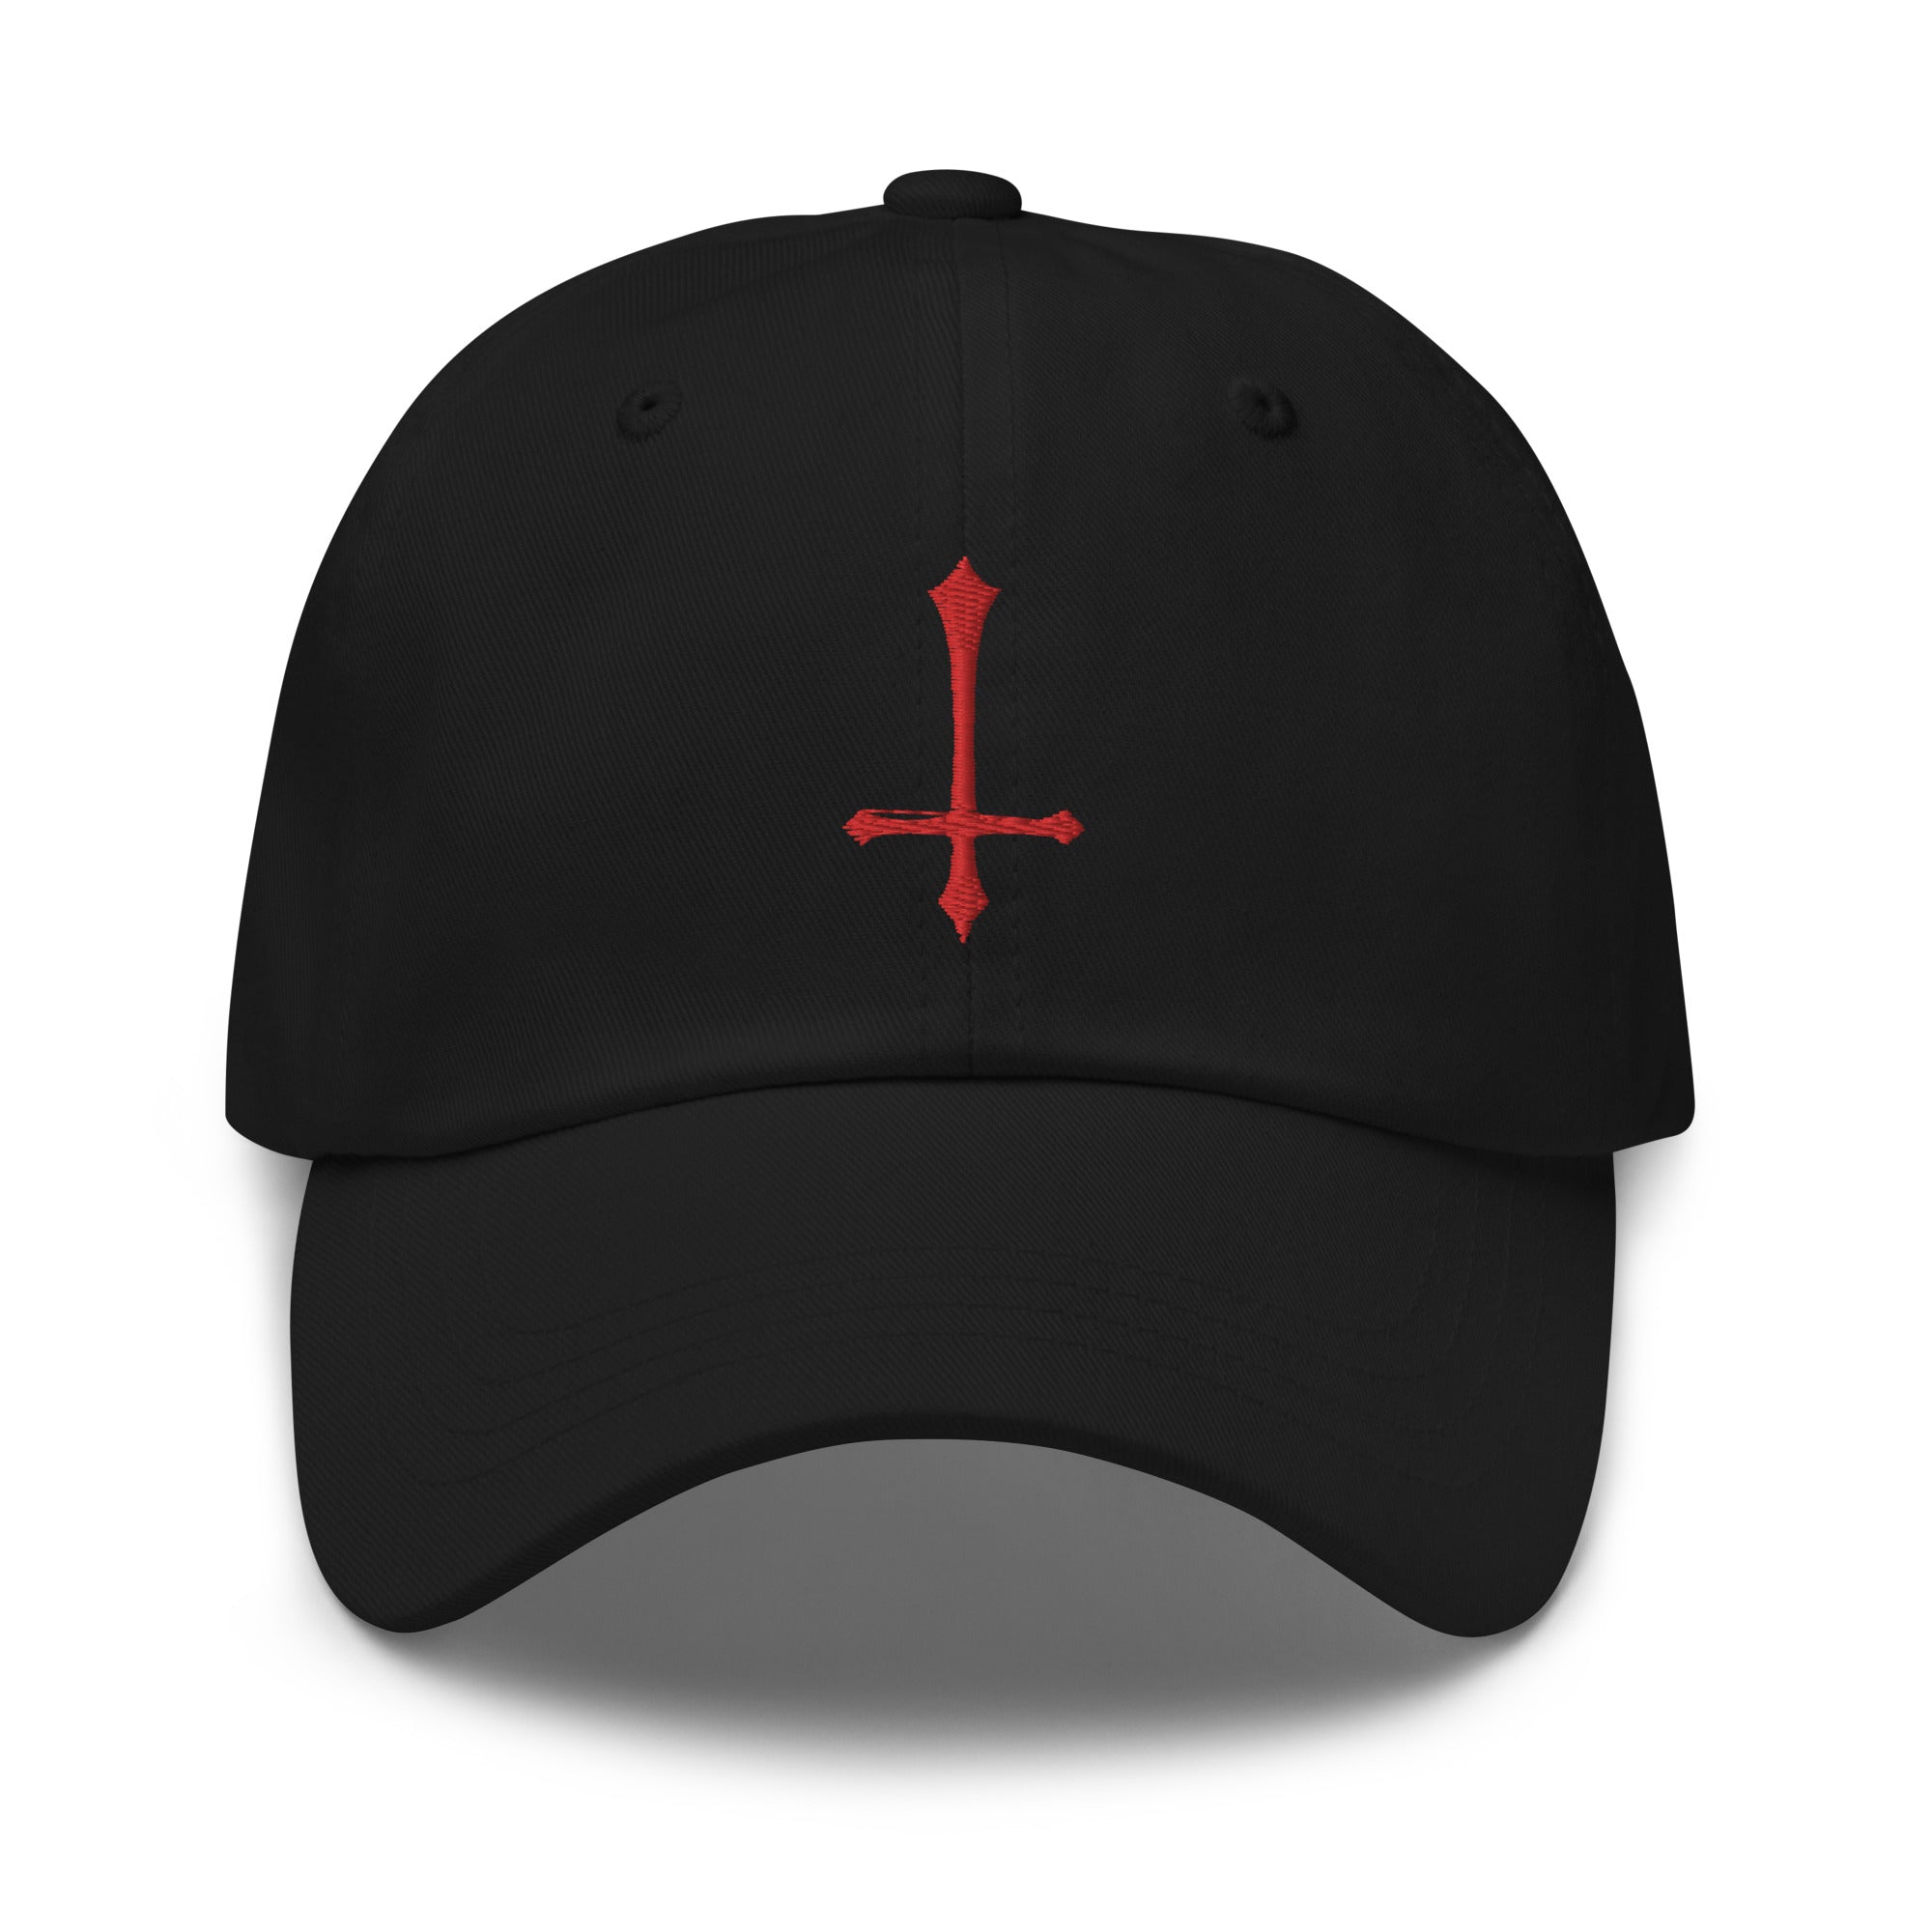 Red Inverted Cross Embroidered Baseball Cap Gothic Ancient Medeival Style Dad hat - Edge of Life Designs